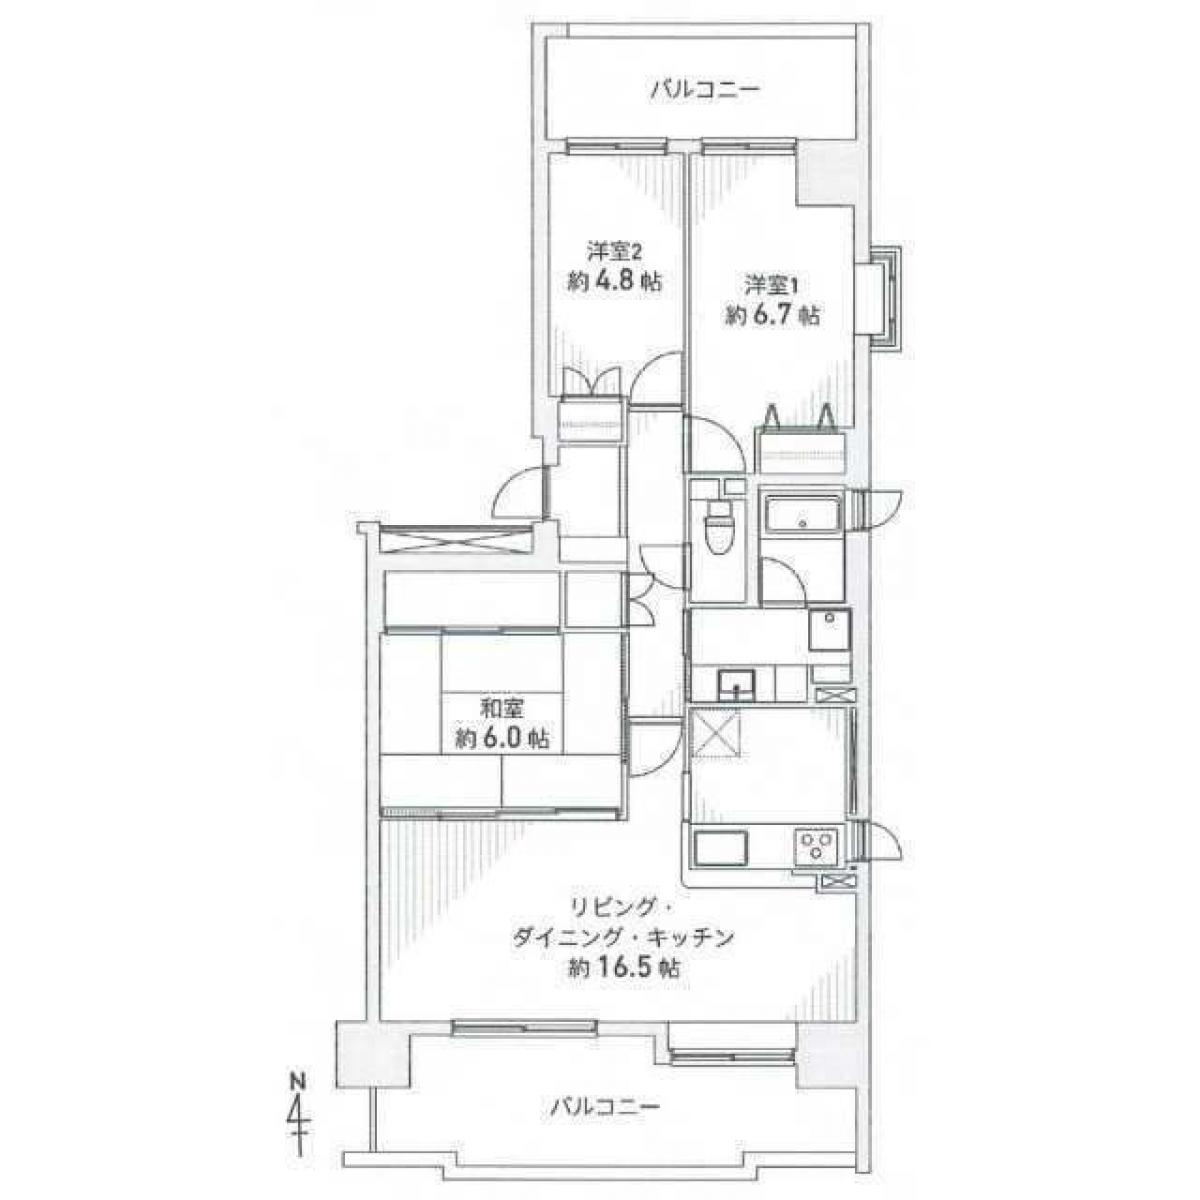 Picture of Apartment For Sale in Miyoshi Shi, Aichi, Japan